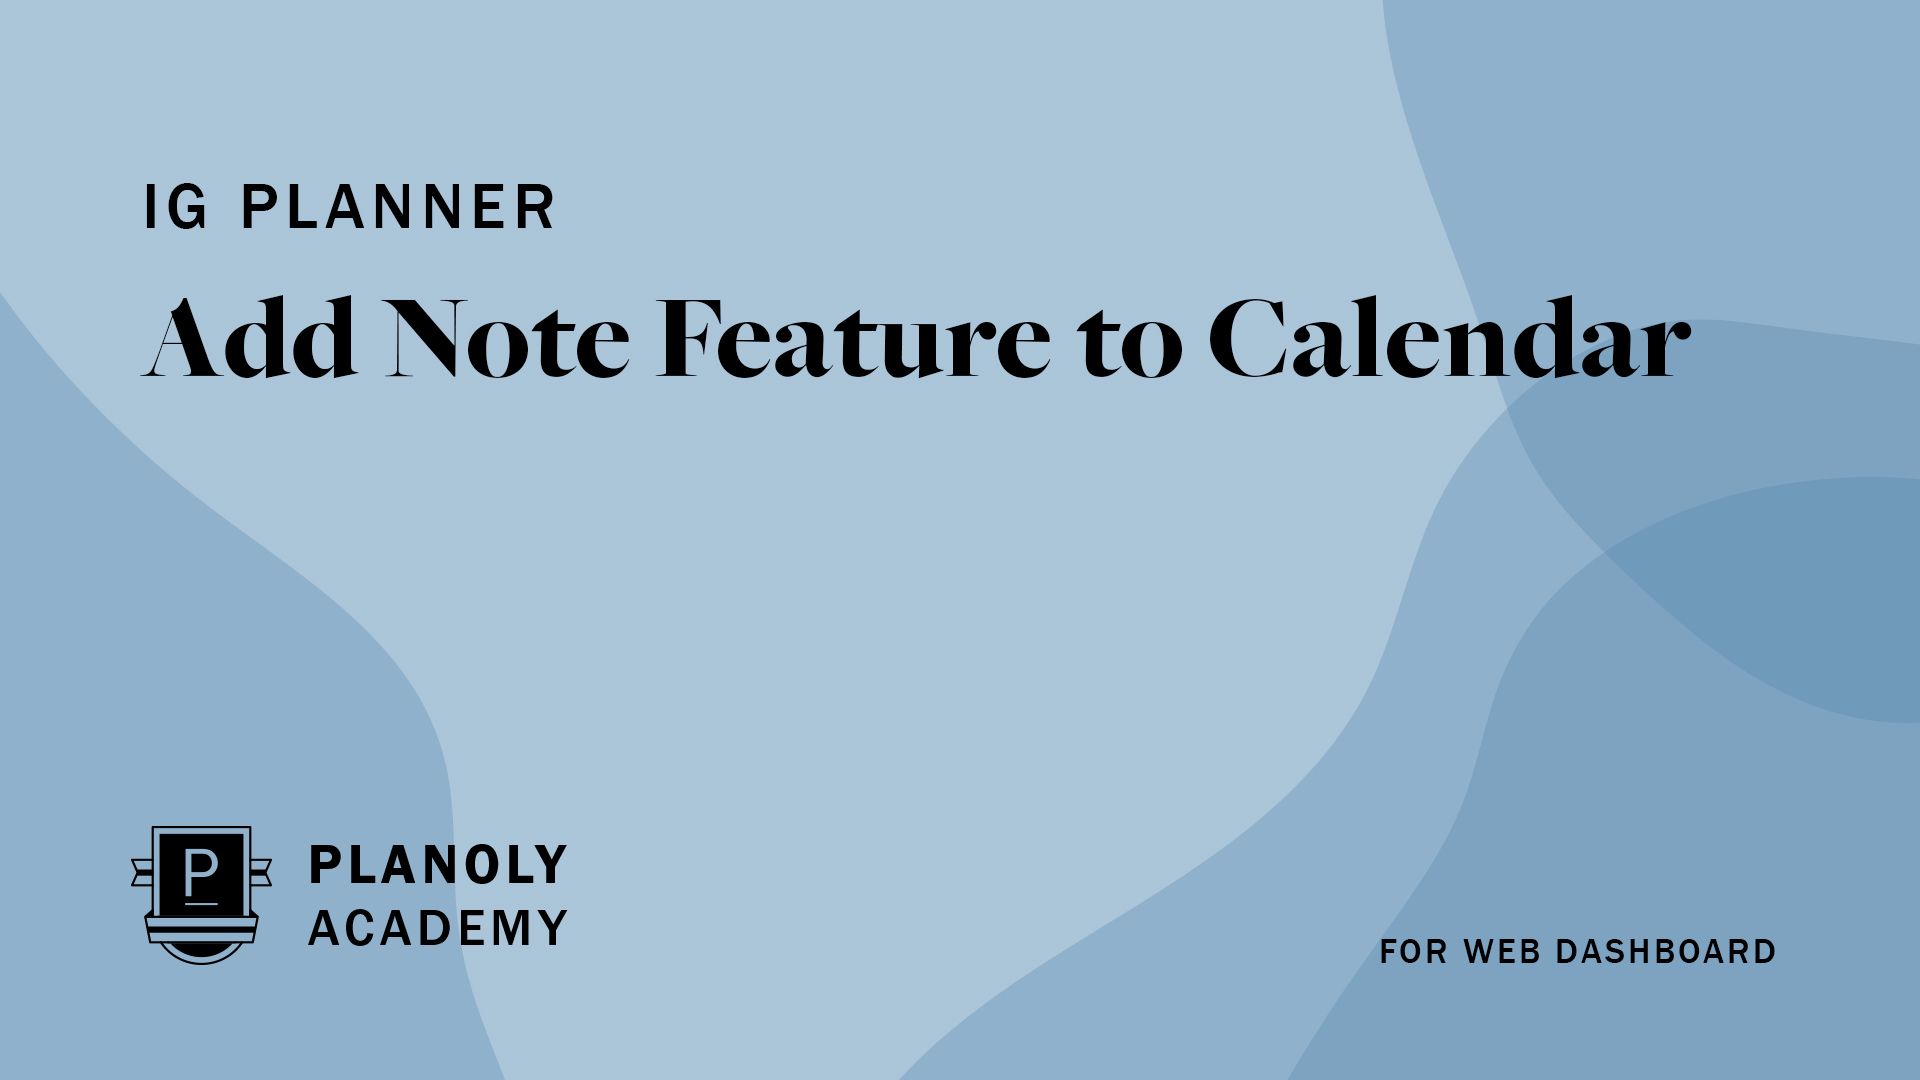 How to Add Note to Calendar